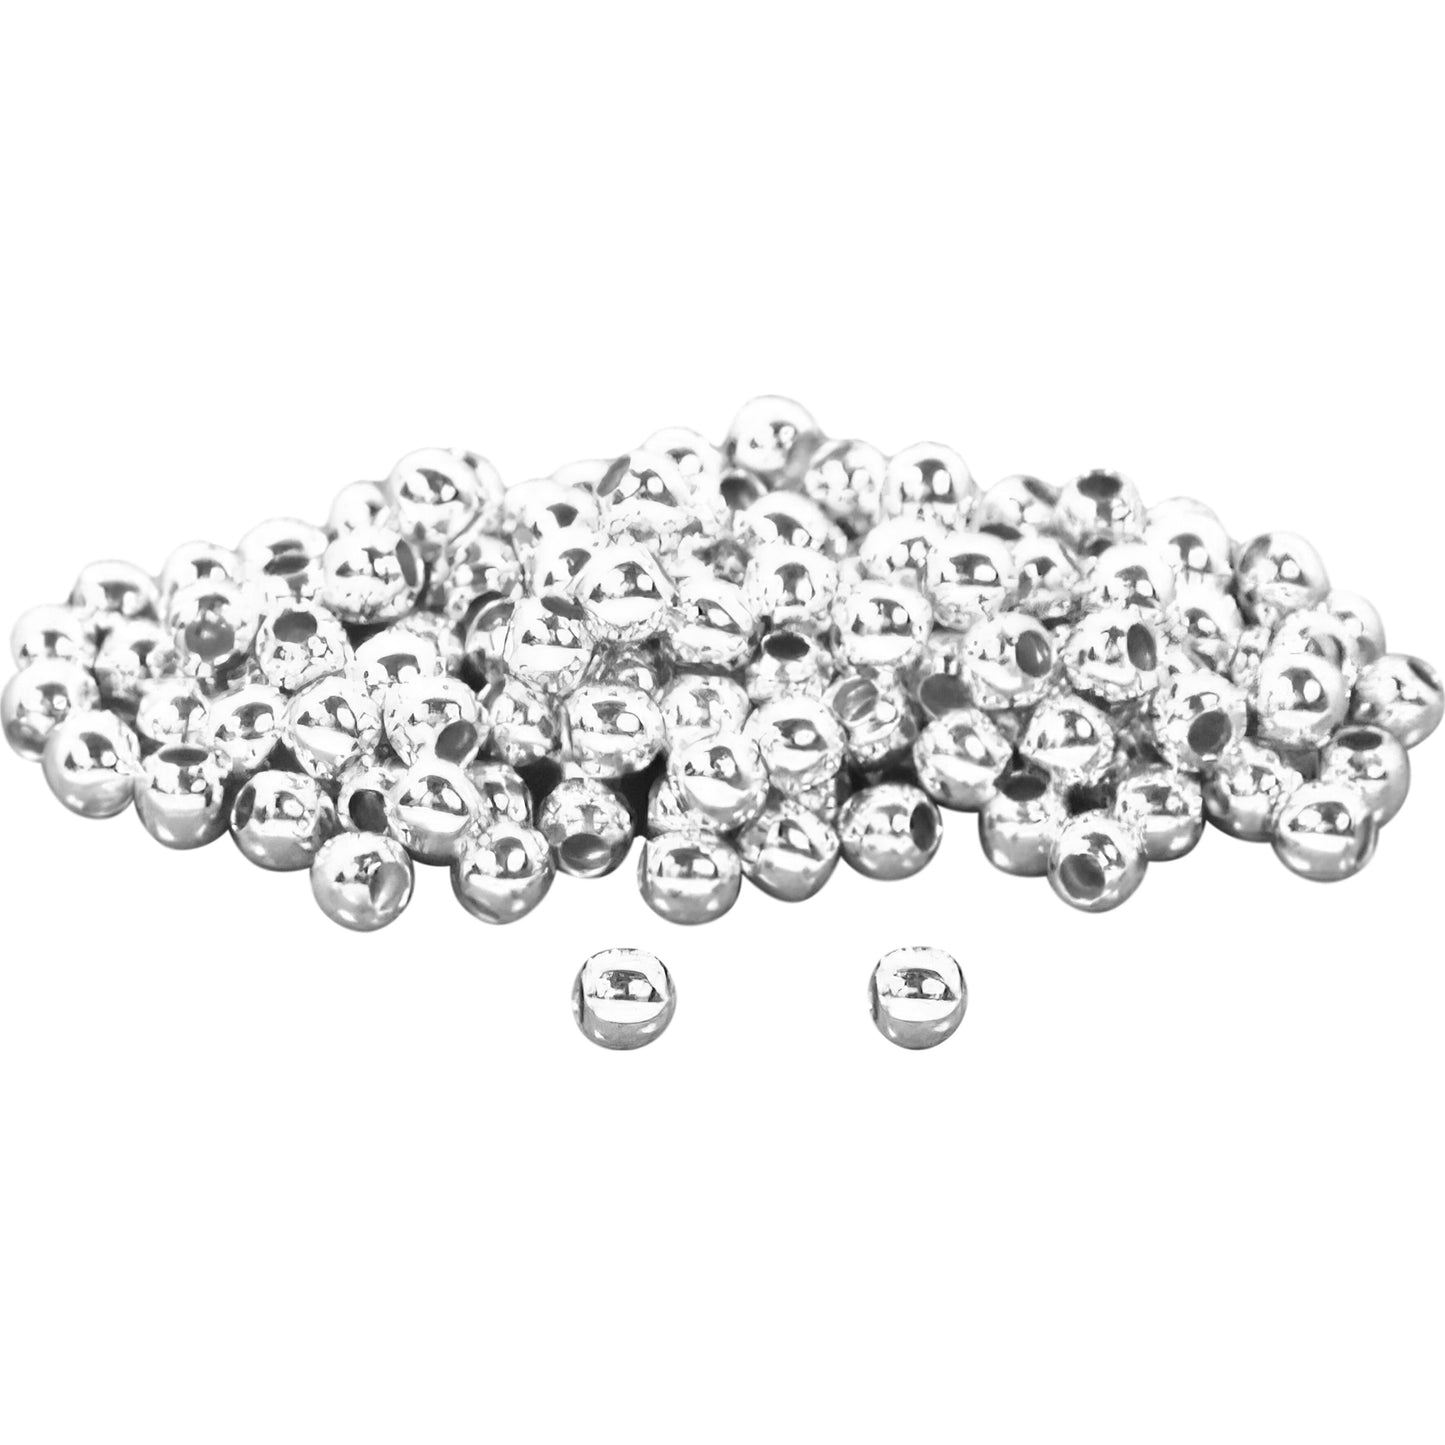 150 Sterling Silver Round Ball Beads Beading Stringing 2mm